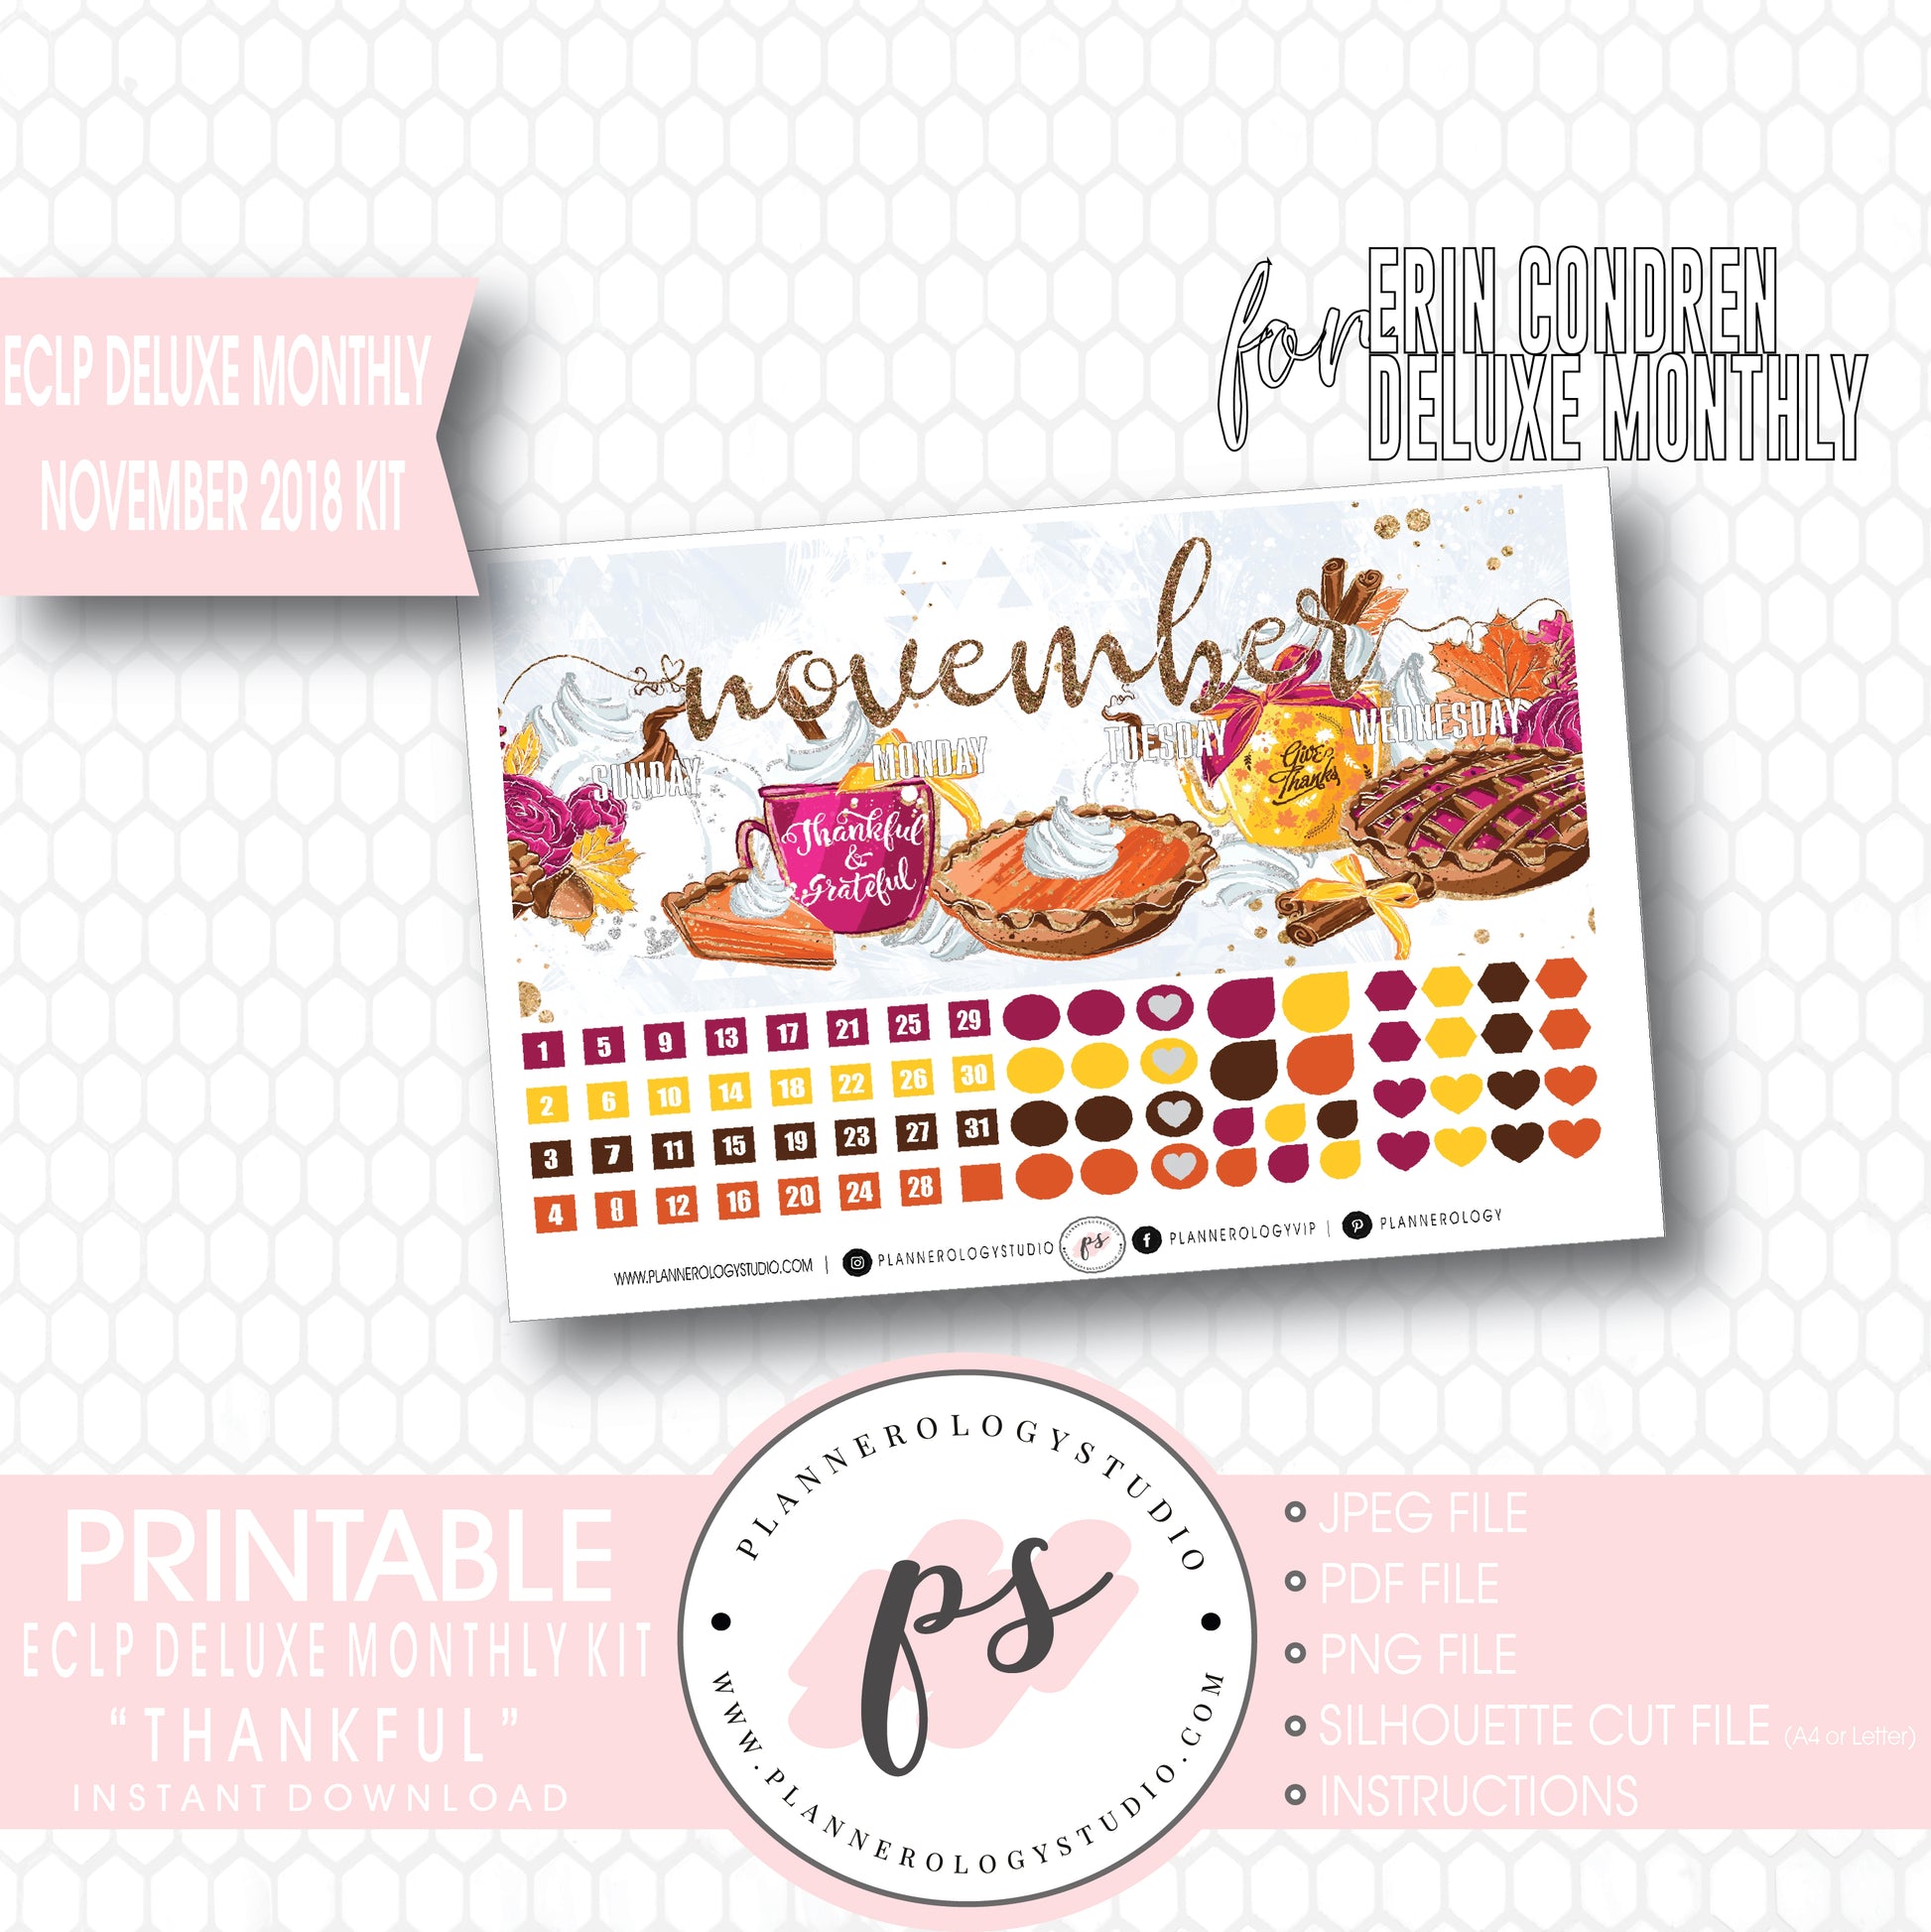 Thankful Thanksgiving November 2018 Monthly View Kit Digital Printable Planner Stickers (for use with Erin Condren Large Deluxe Monthly Planner) - Plannerologystudio